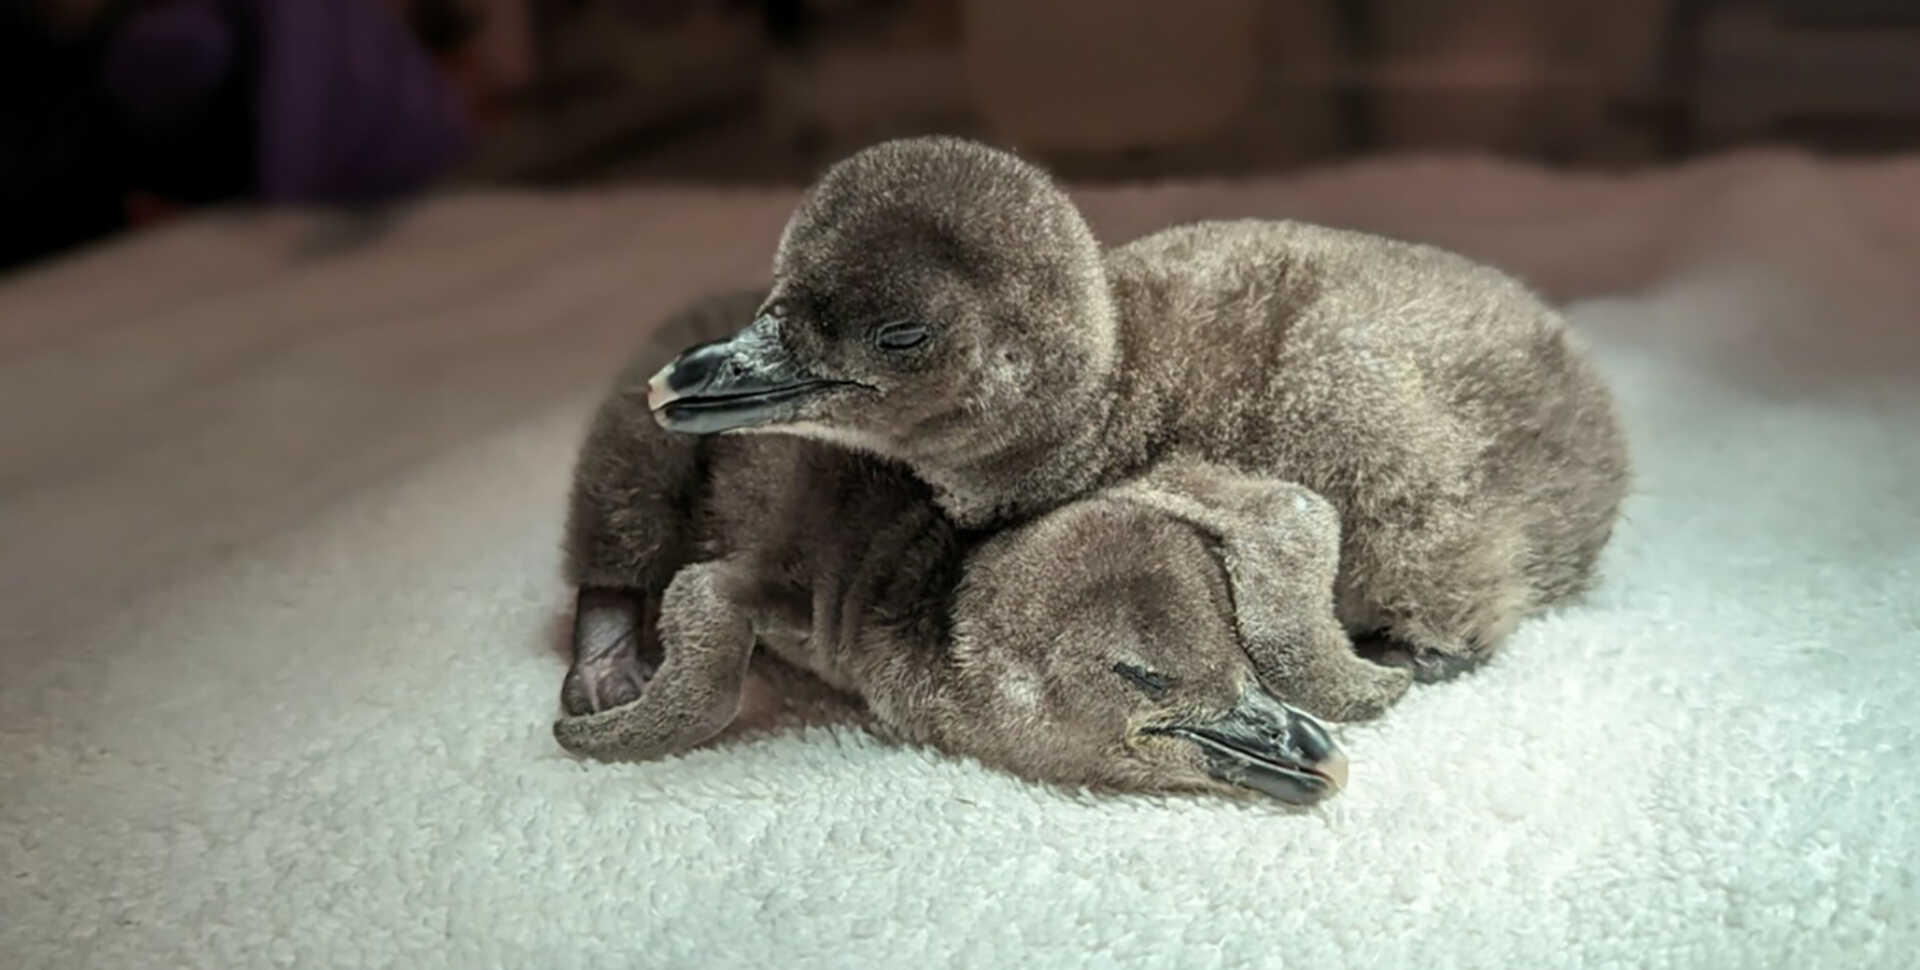 Tiny African penguin chicks Ignatz and Lazola cuddle up together behind the scenes at the Academy